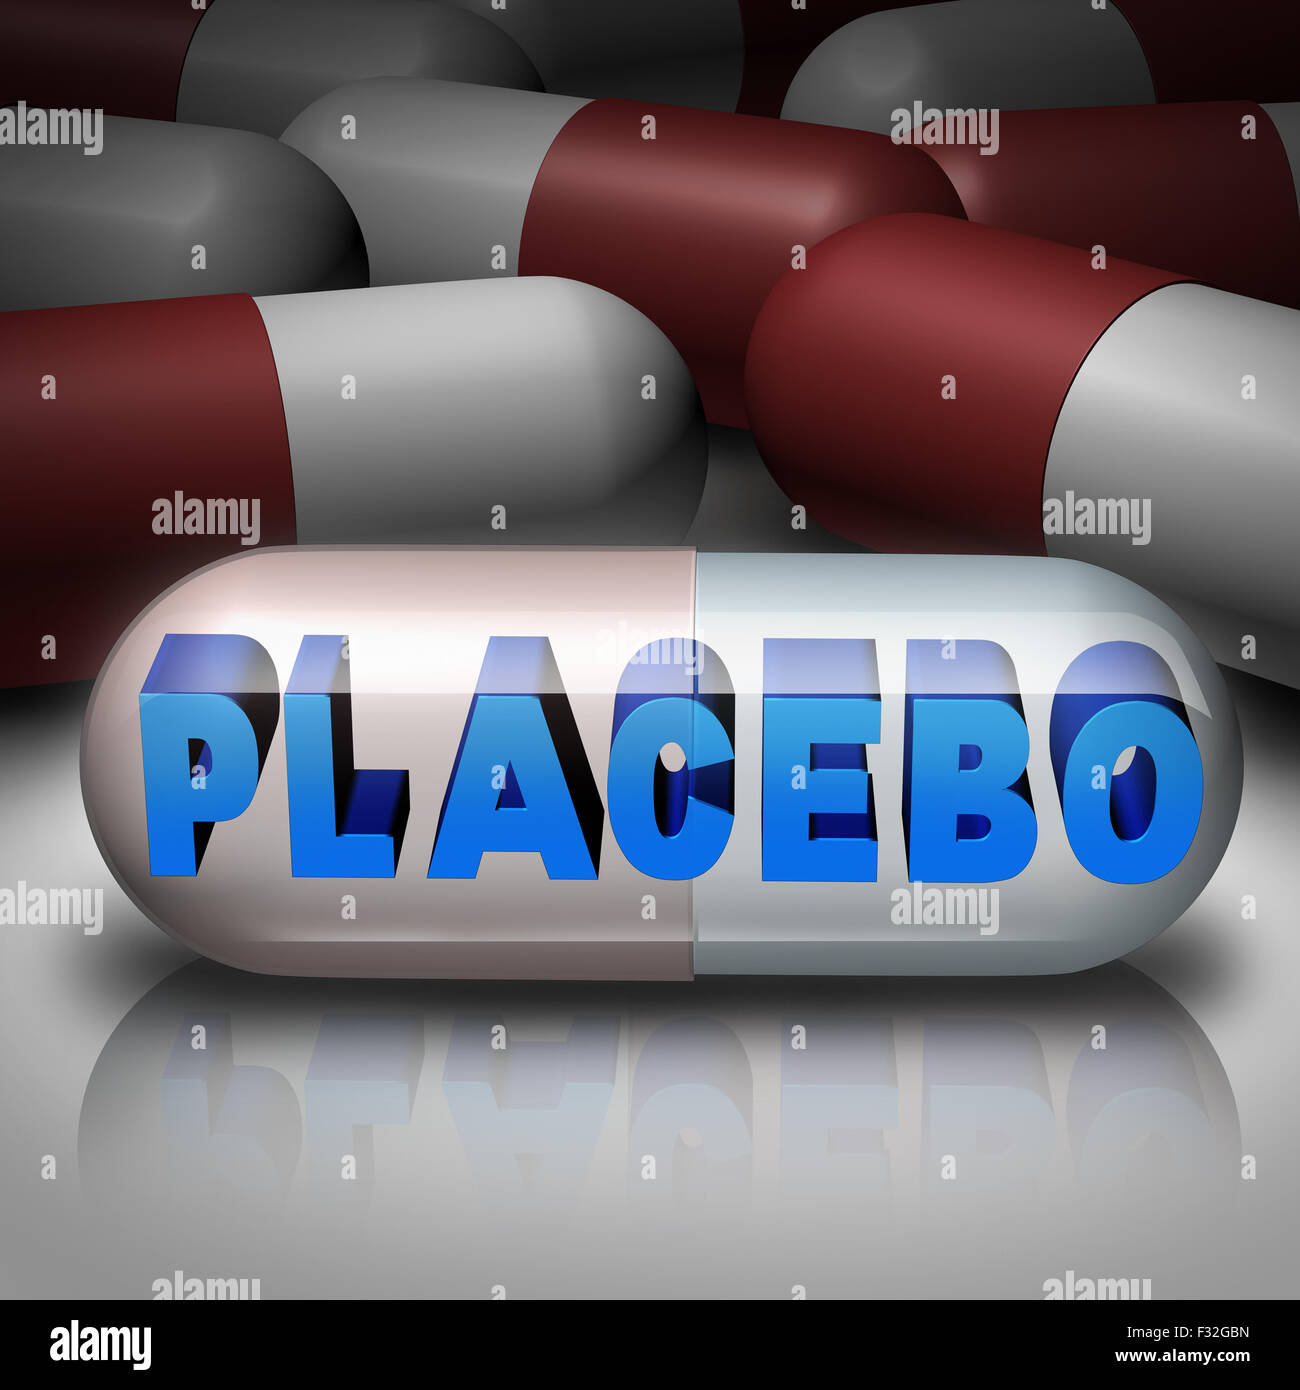 Placebo effect medical health concept as a transparent pill with text inside as a medicine symbol for research in finding affective drugs using a double blind study. Stock Photo